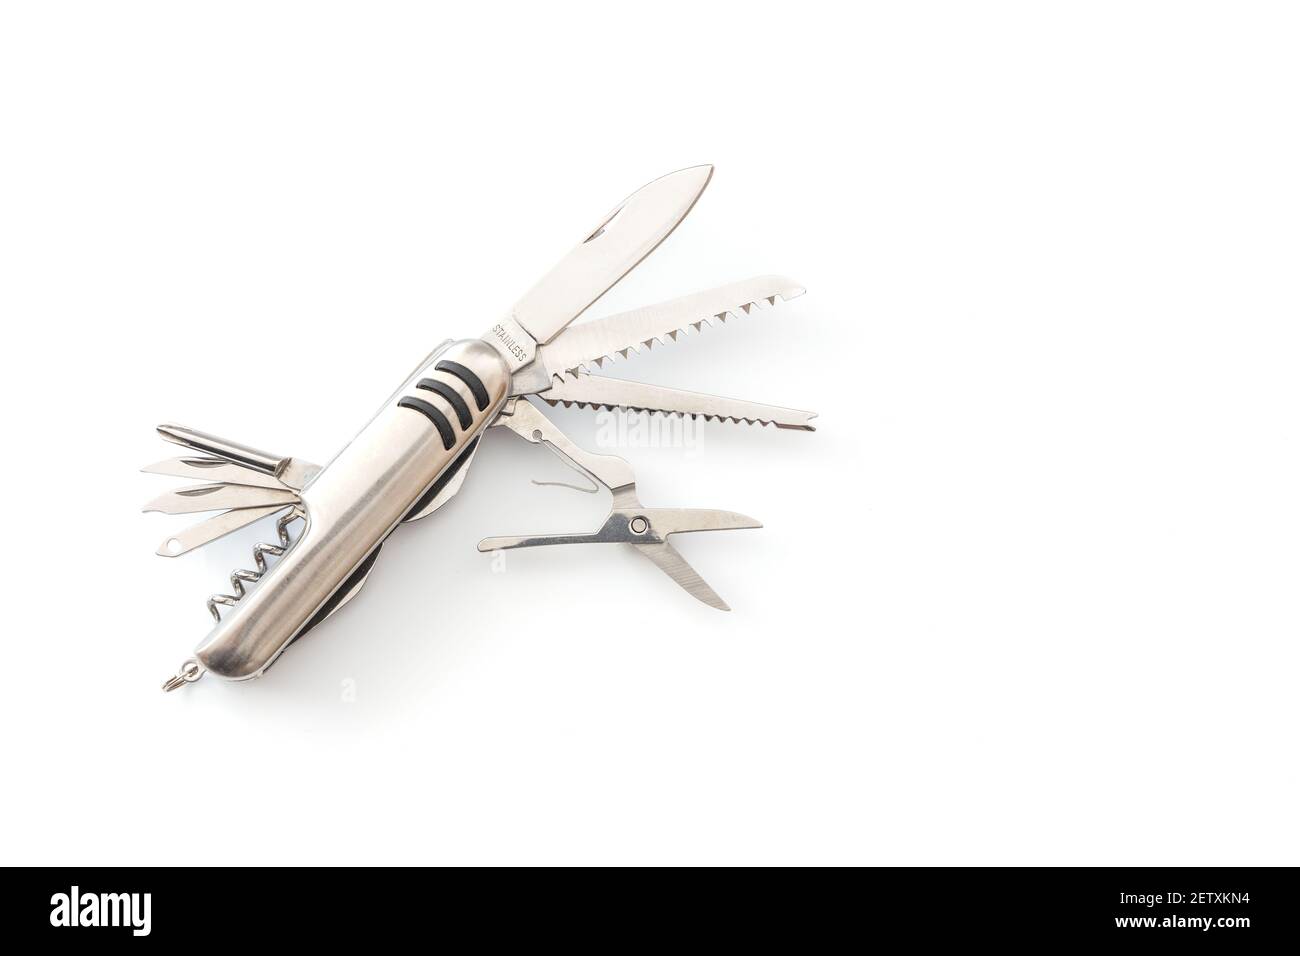 Silver pocket,multi-function swiss army pocket knife tool on white background, camping tools, close-up. Stock Photo